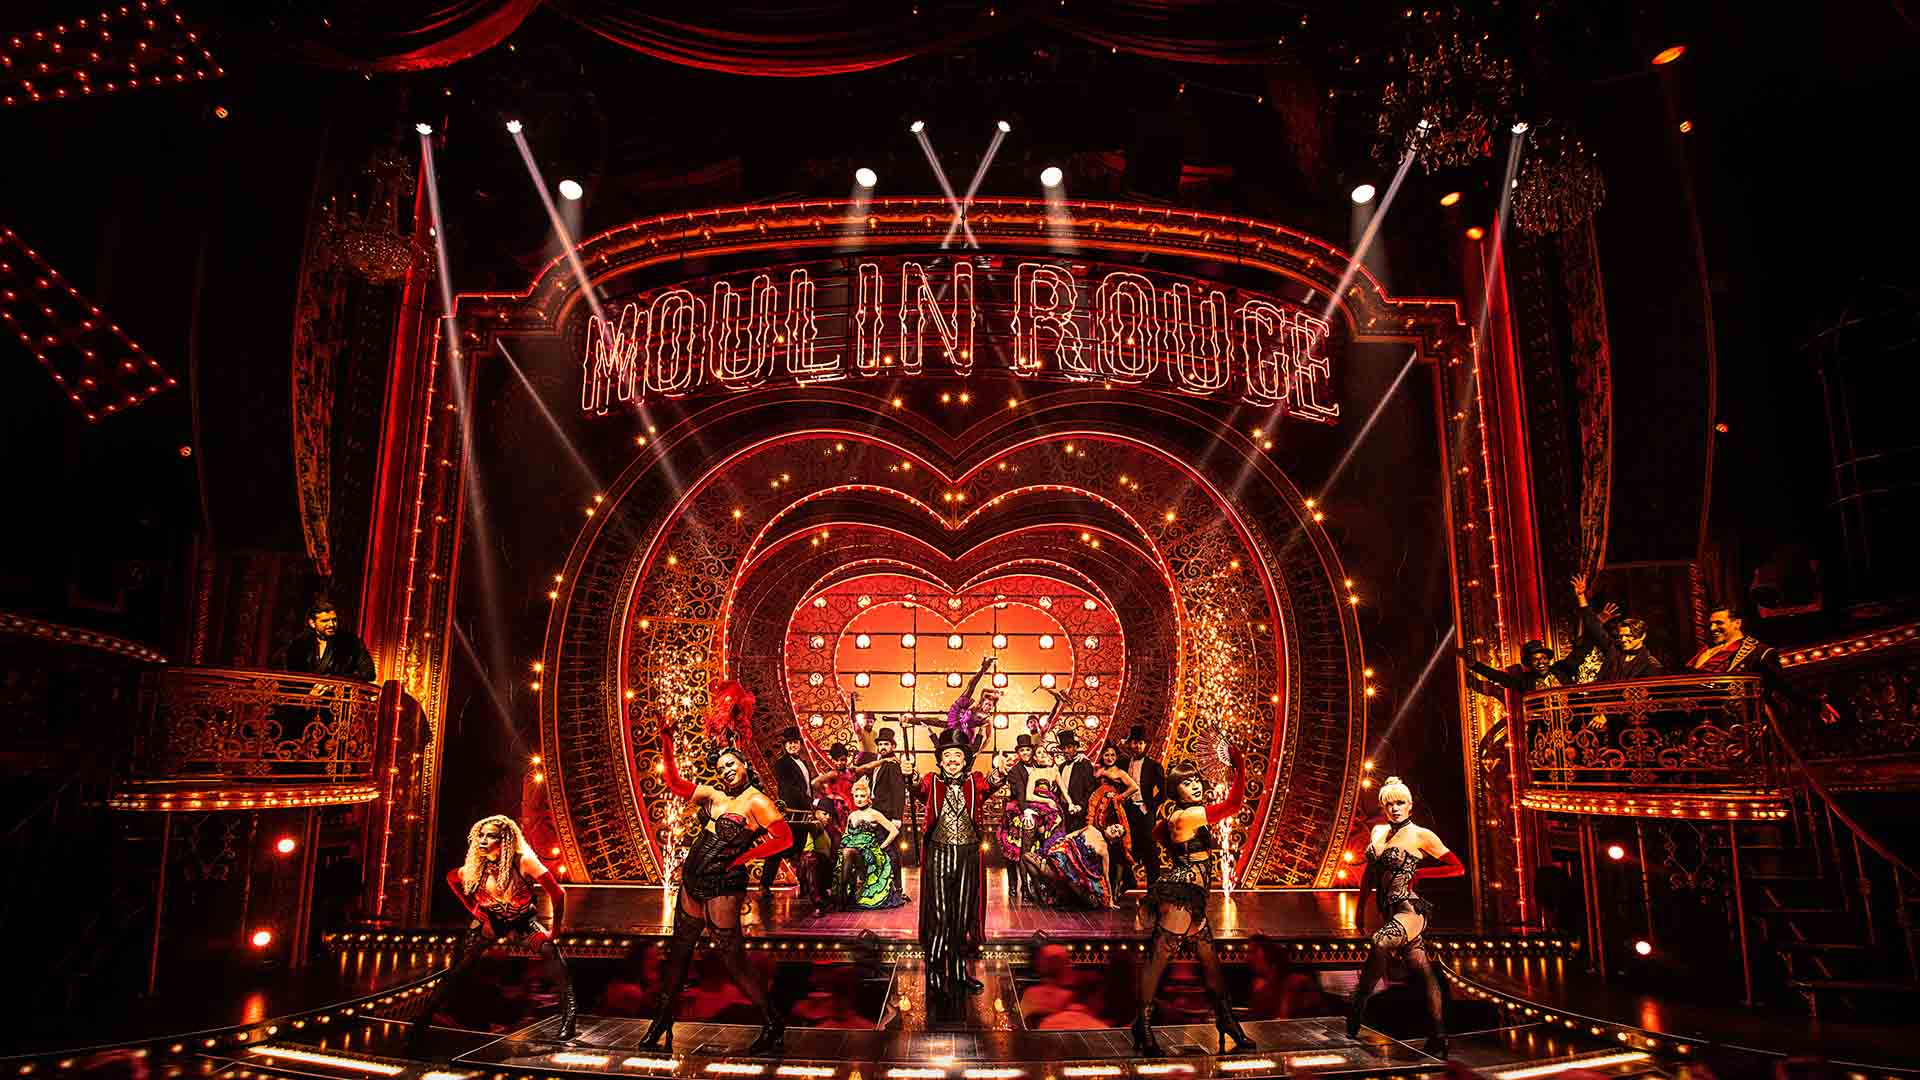 'Moulin Rouge! The Musical' Will Finally Make Its Spectacular Australian Debut in November